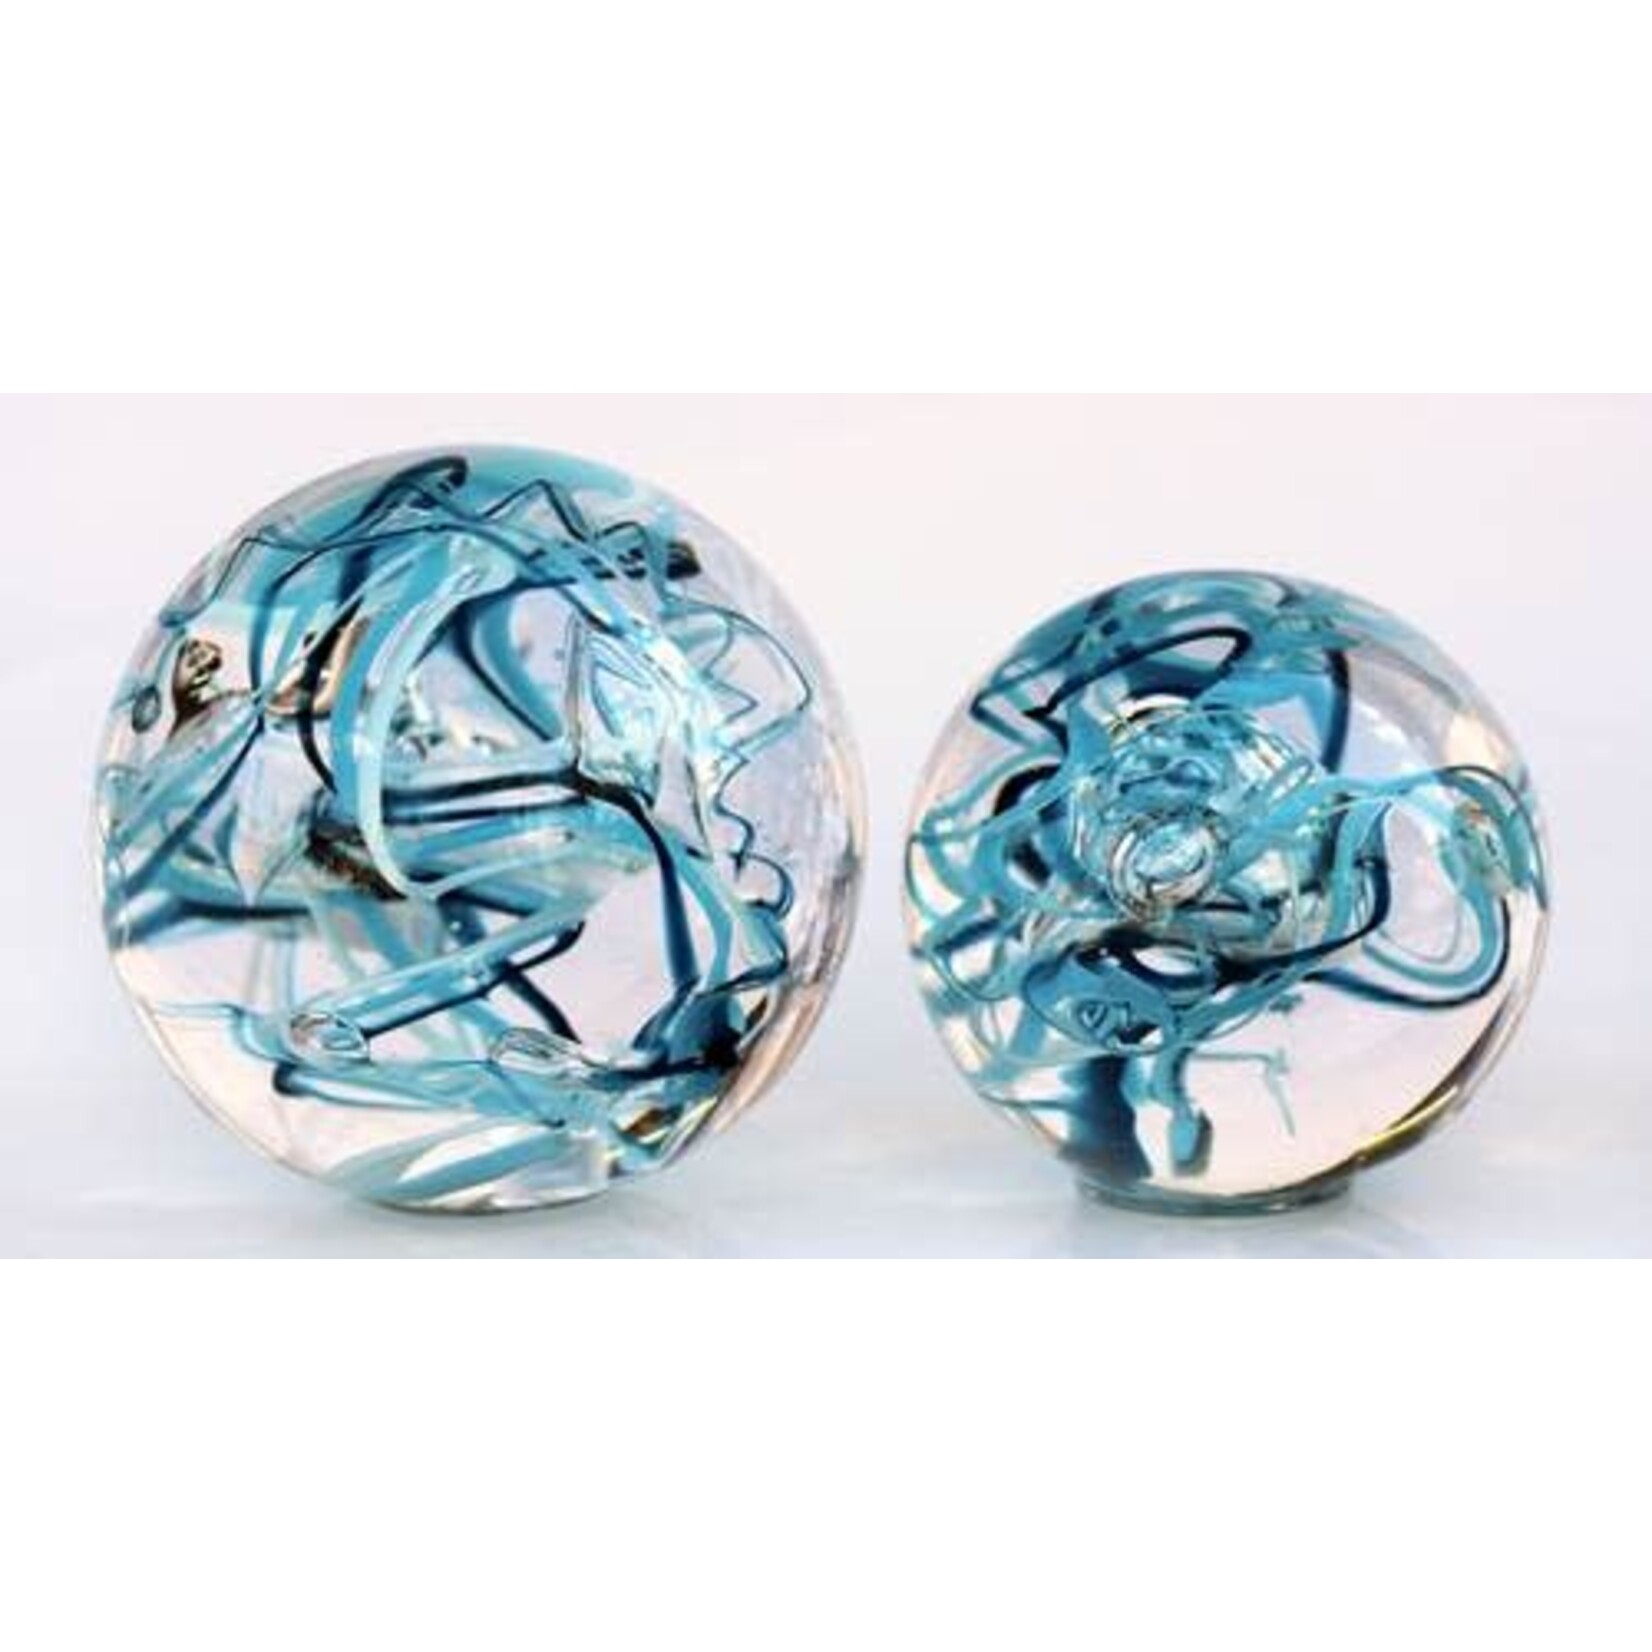 Glass Rocks Paperweight, Large Teal